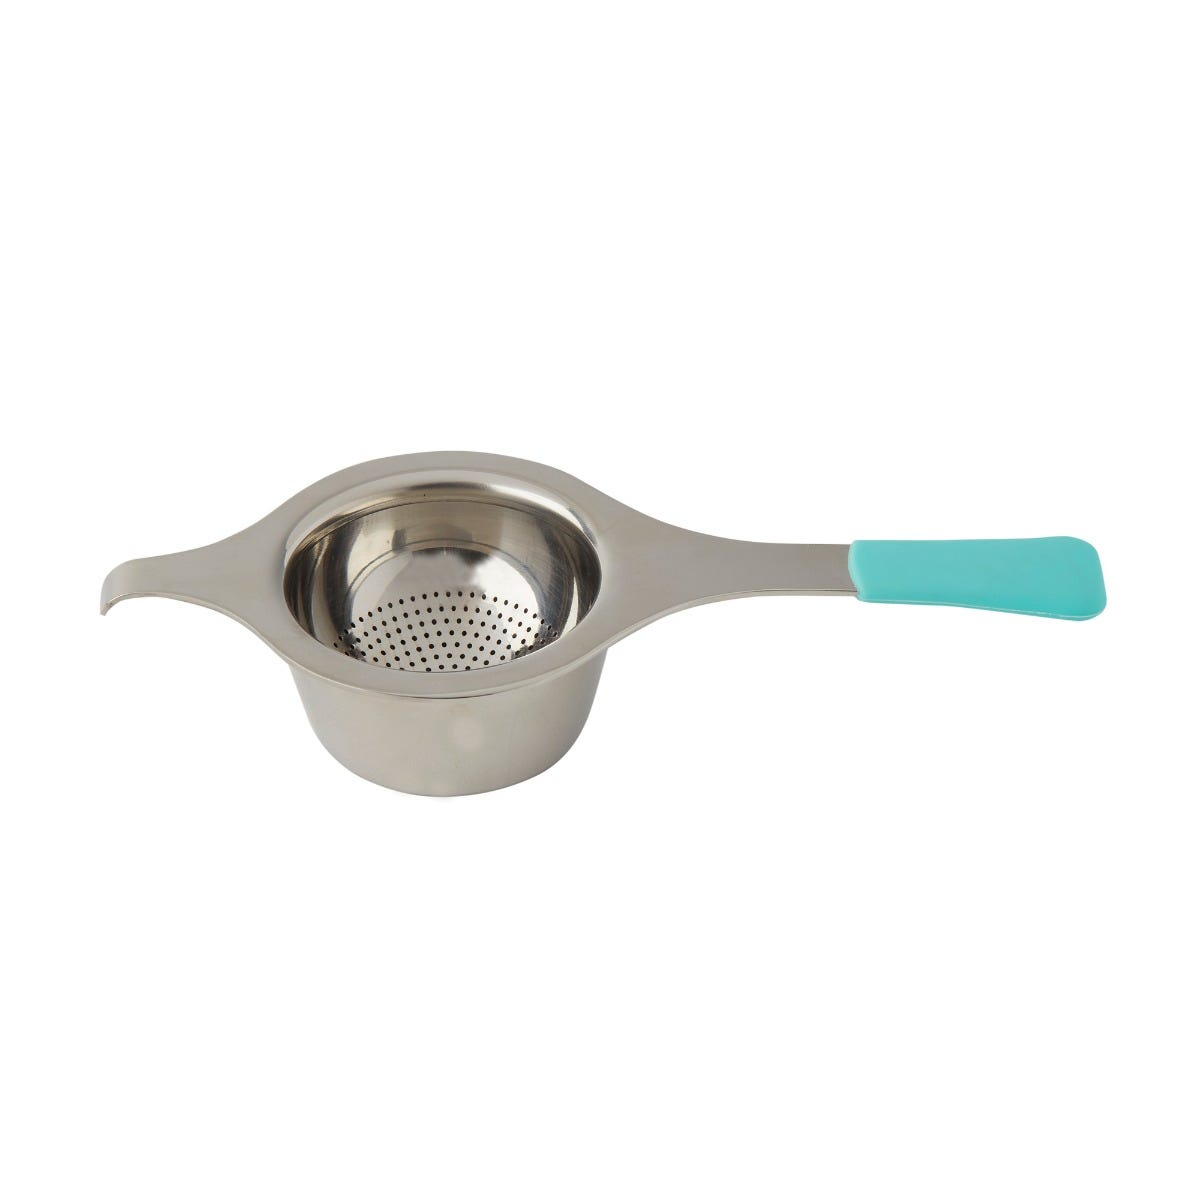 Stainless Steel Tea Strainer with Holder - Traditional and